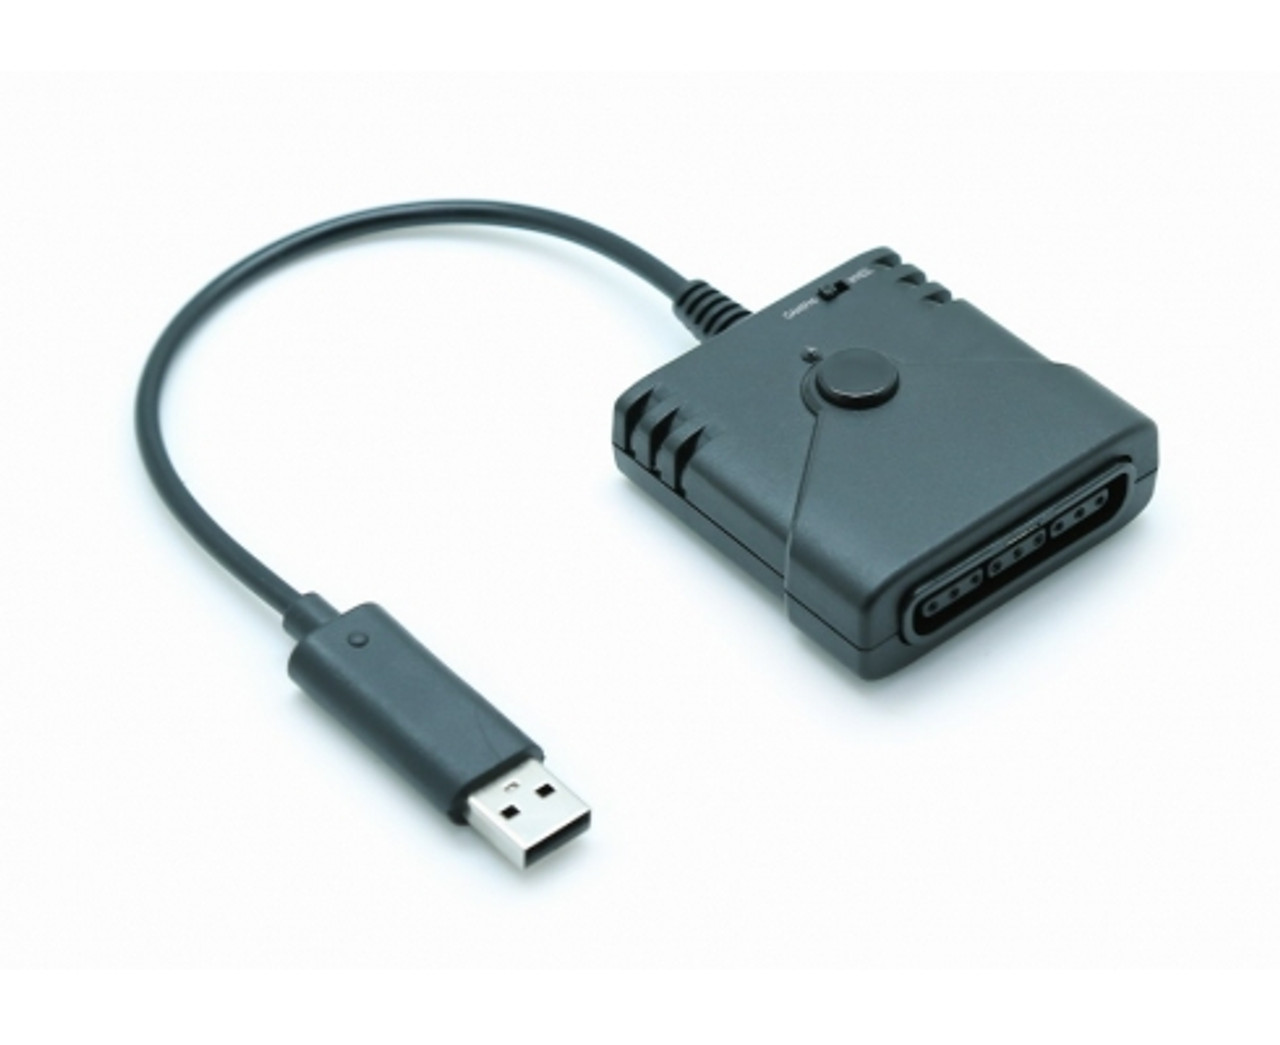 xbox 360 controller wired adapter